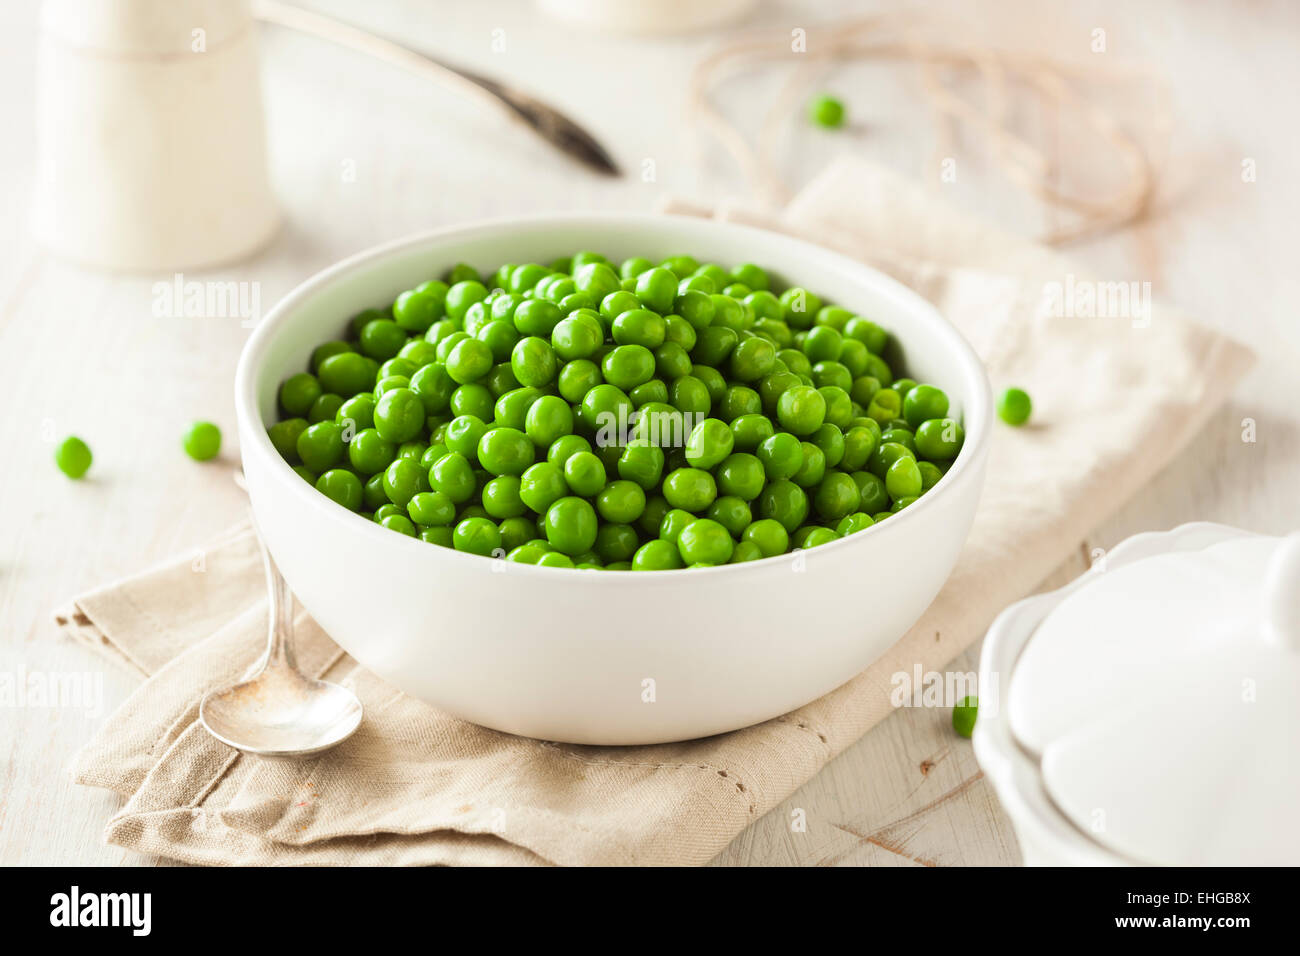 Organic Steamed Fresh Green Peas in a Bowl Stock Photo